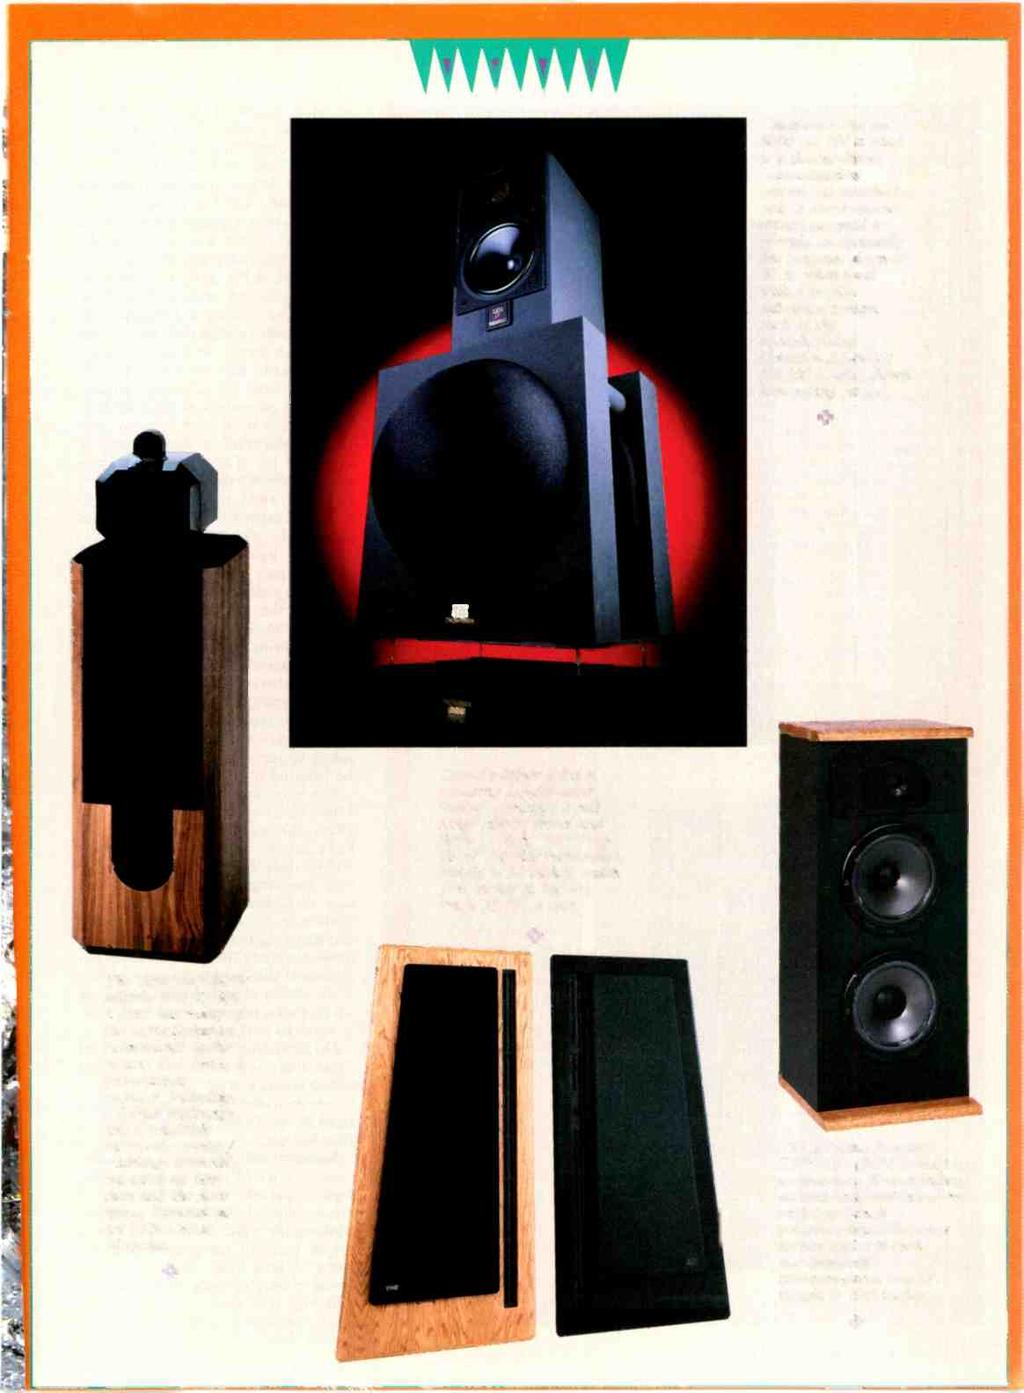 Celestion's System 6000 ($2,700 a pair) is a double -dipole bass -extension system.